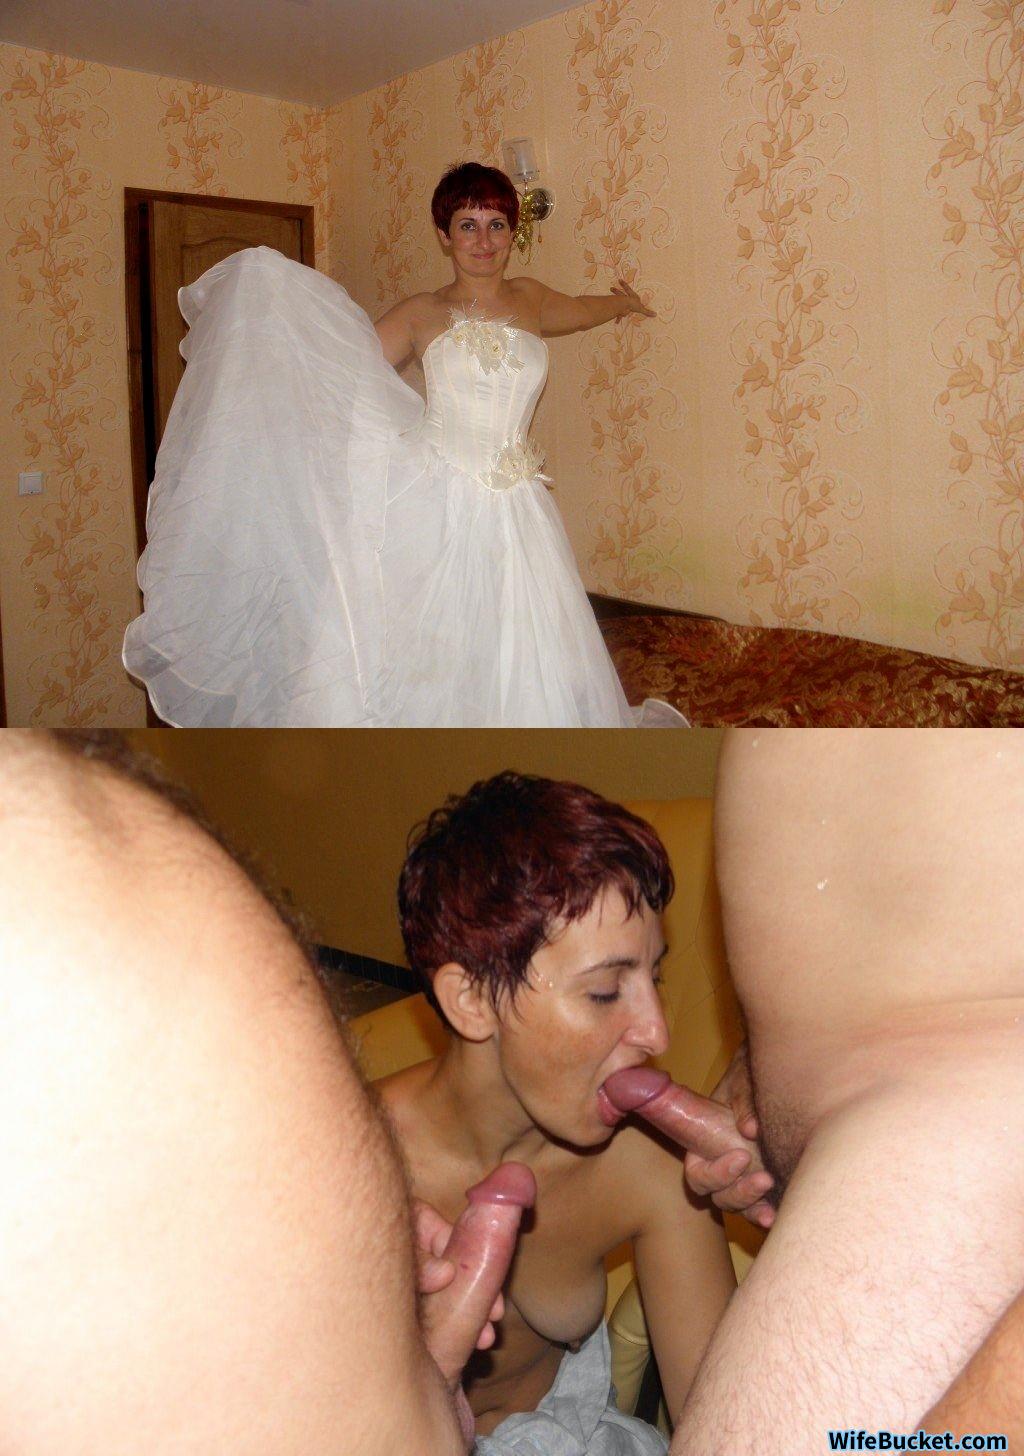 GALLERY Before-after nudes of real brides! Sex Image Hq